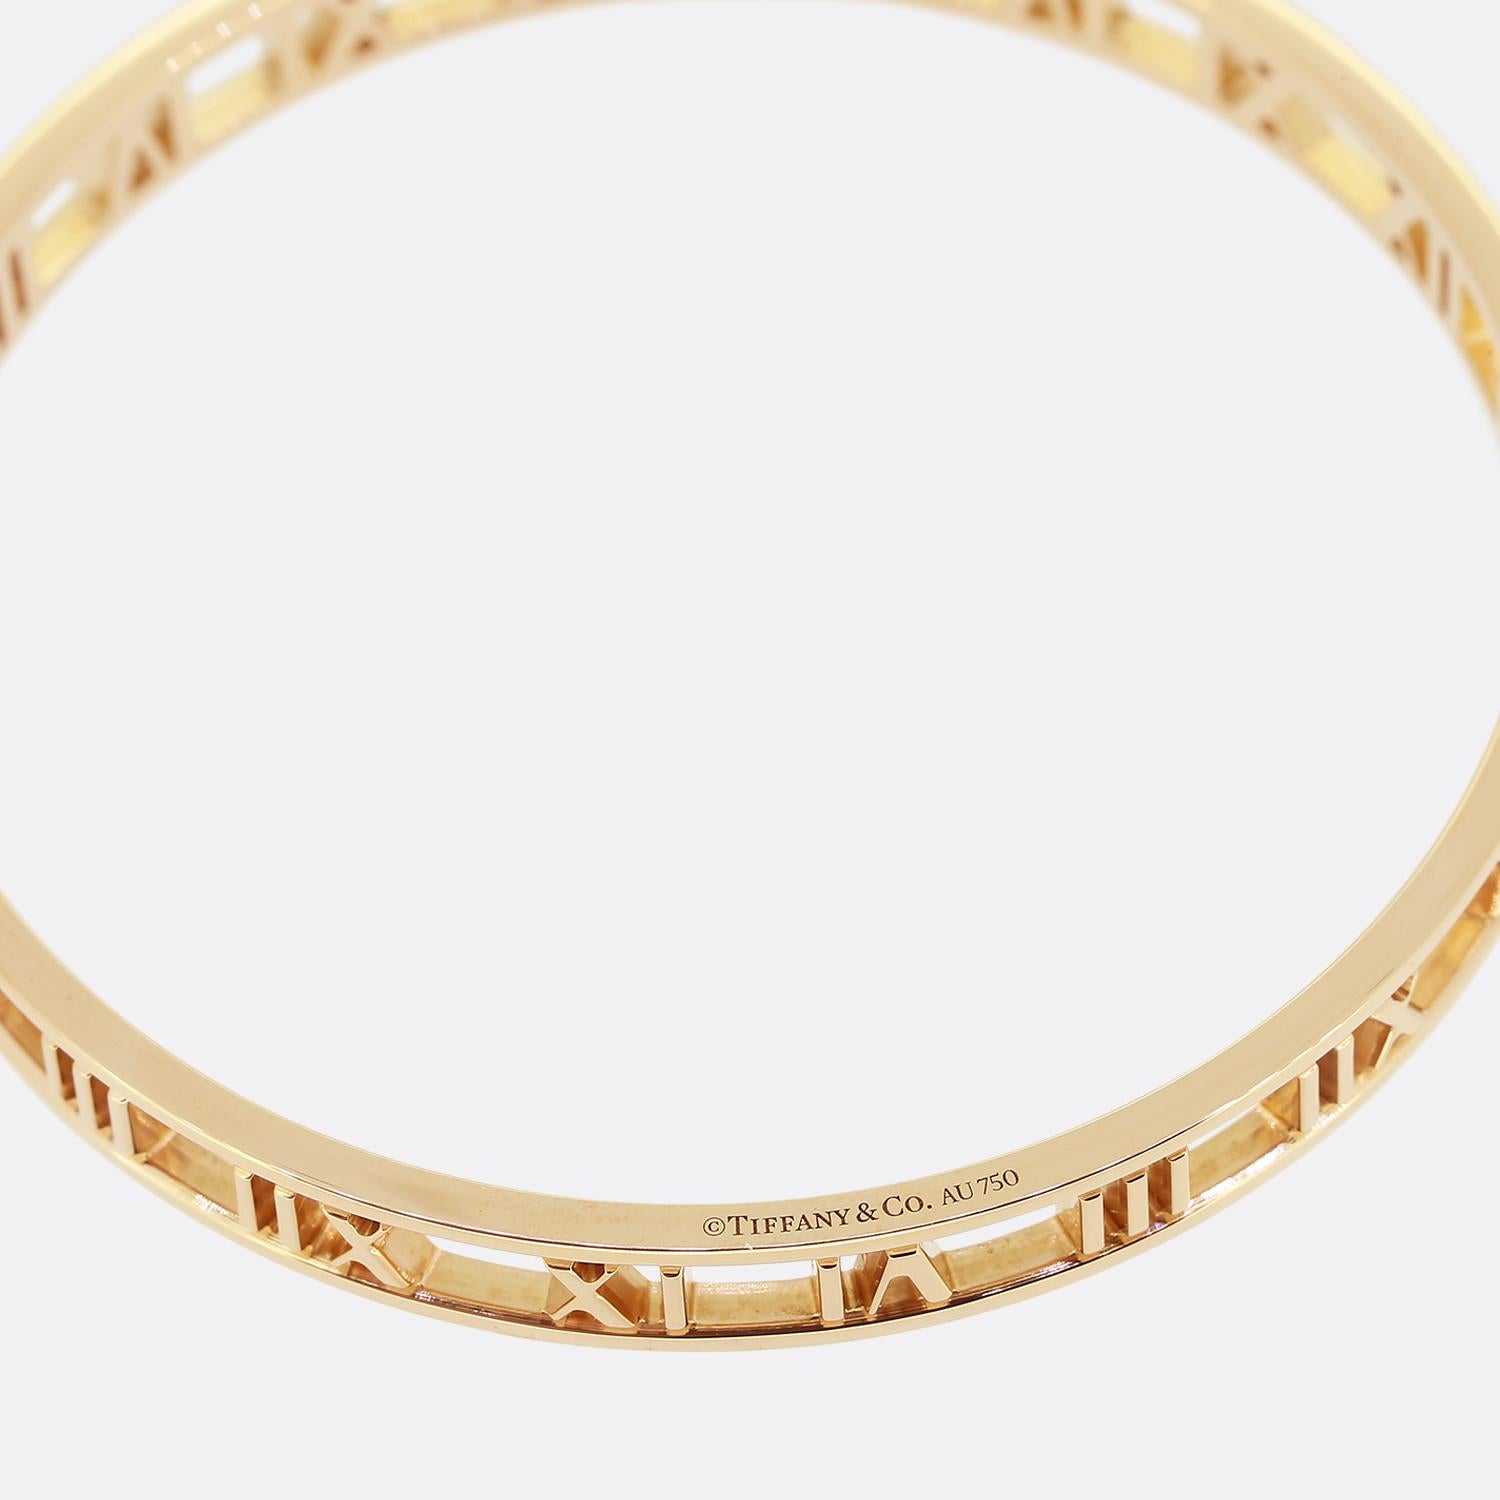 This is an 18ct rose gold bangle from the luxury jewellery designer Tiffany & Co. The bangle forms part of the atlas collection and has the iconic Roman numeral design. This is a slip on model so please take note of the measurements. It is the